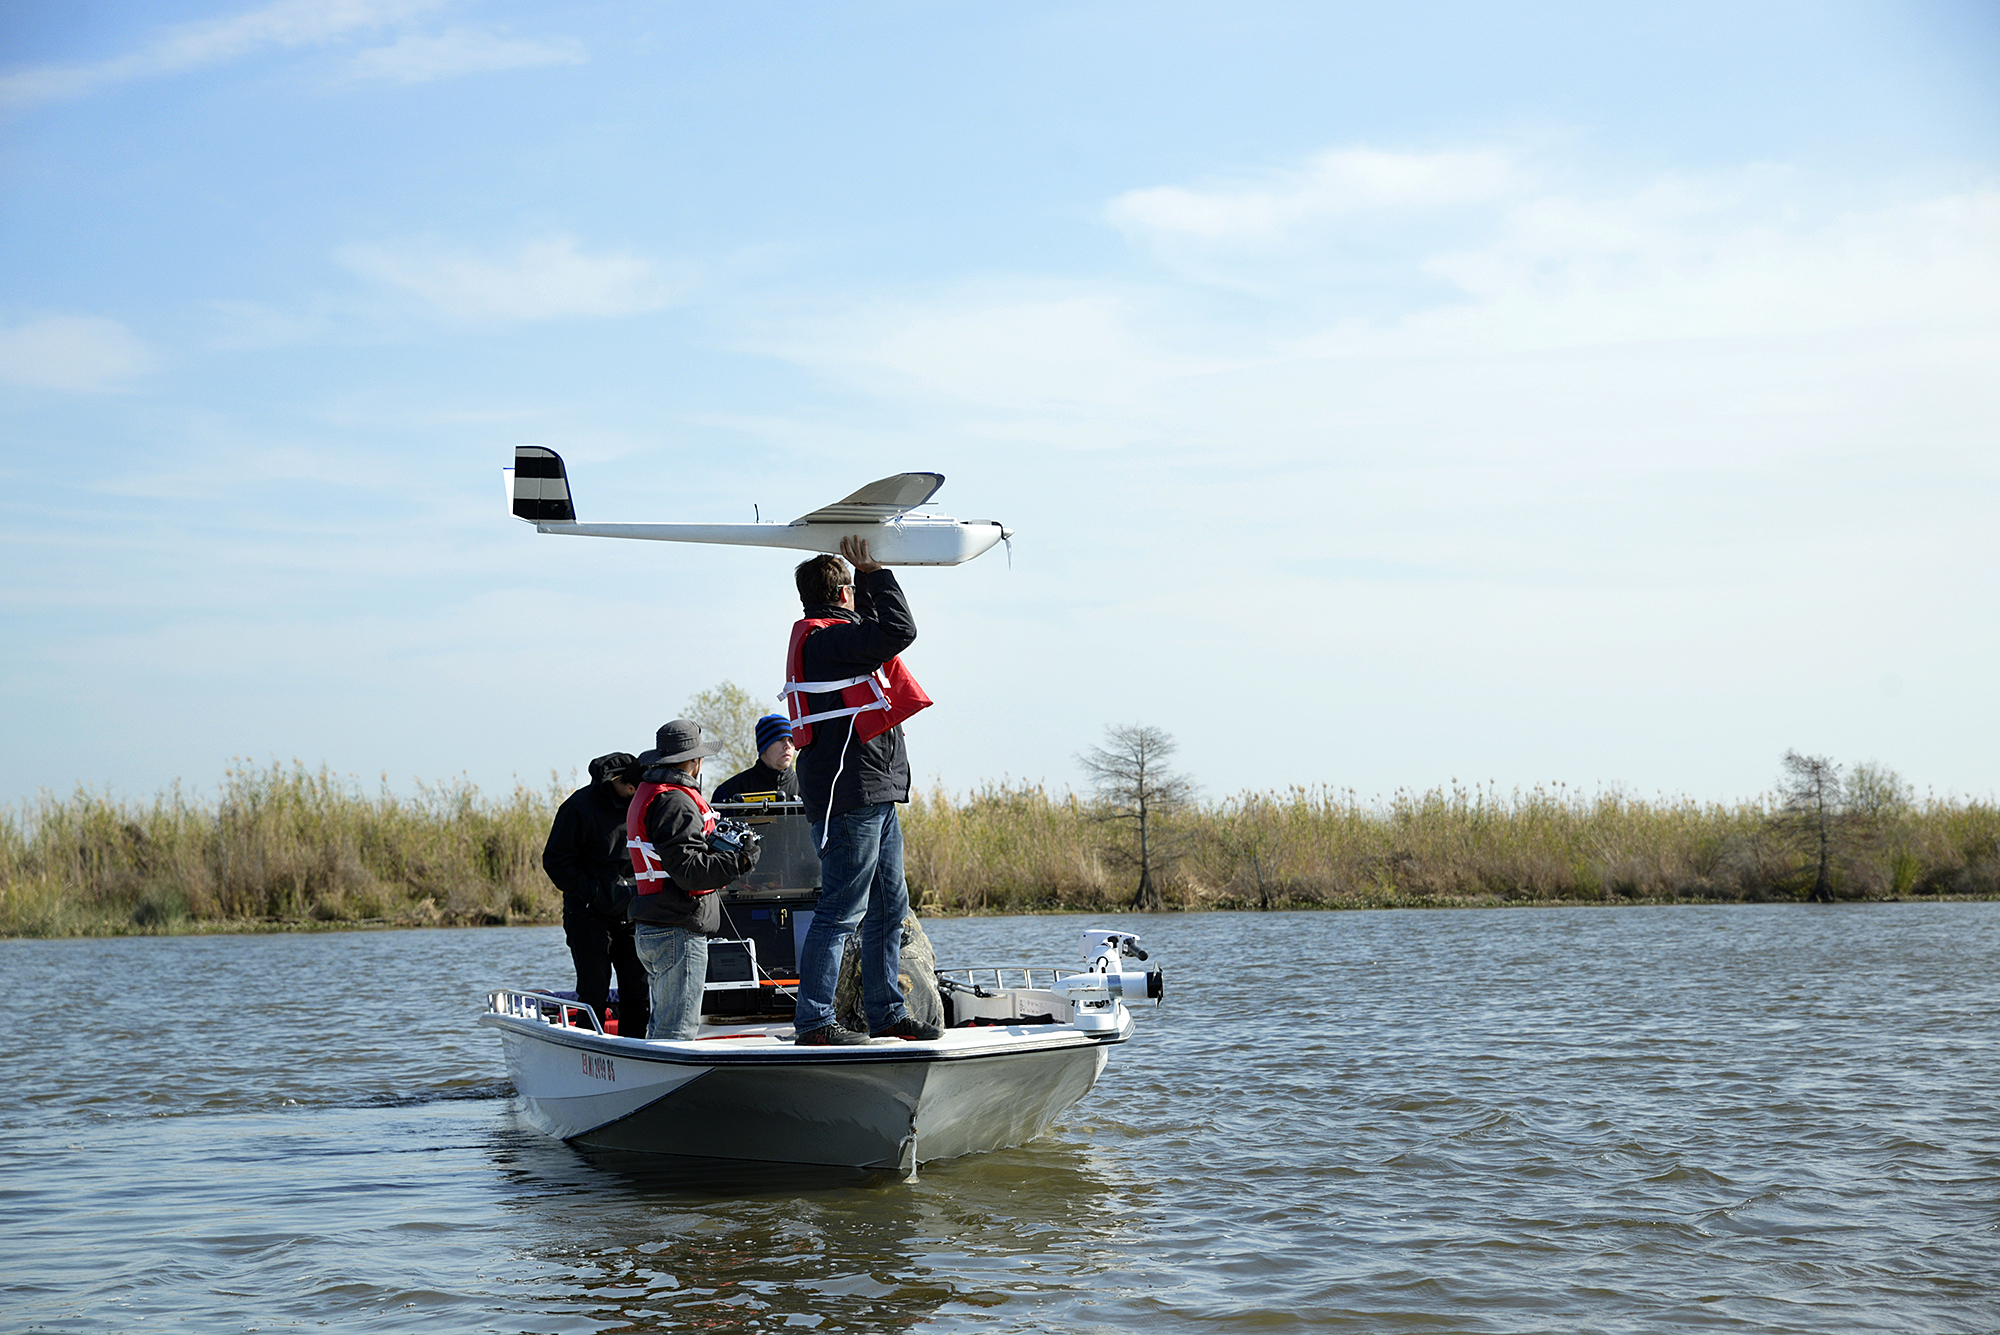 An unmanned aerial vehicle is prepared for launch on Thursday [Dec. 18] in St. Tammany Parish, Louisiana. Researchers with Mississippi State and NOAA are mapping sections of the Pearl River with the UAV to better understand where and how much water flows through the area and the impact it can have on local communities when hurricanes and other tropical weather systems develop. 